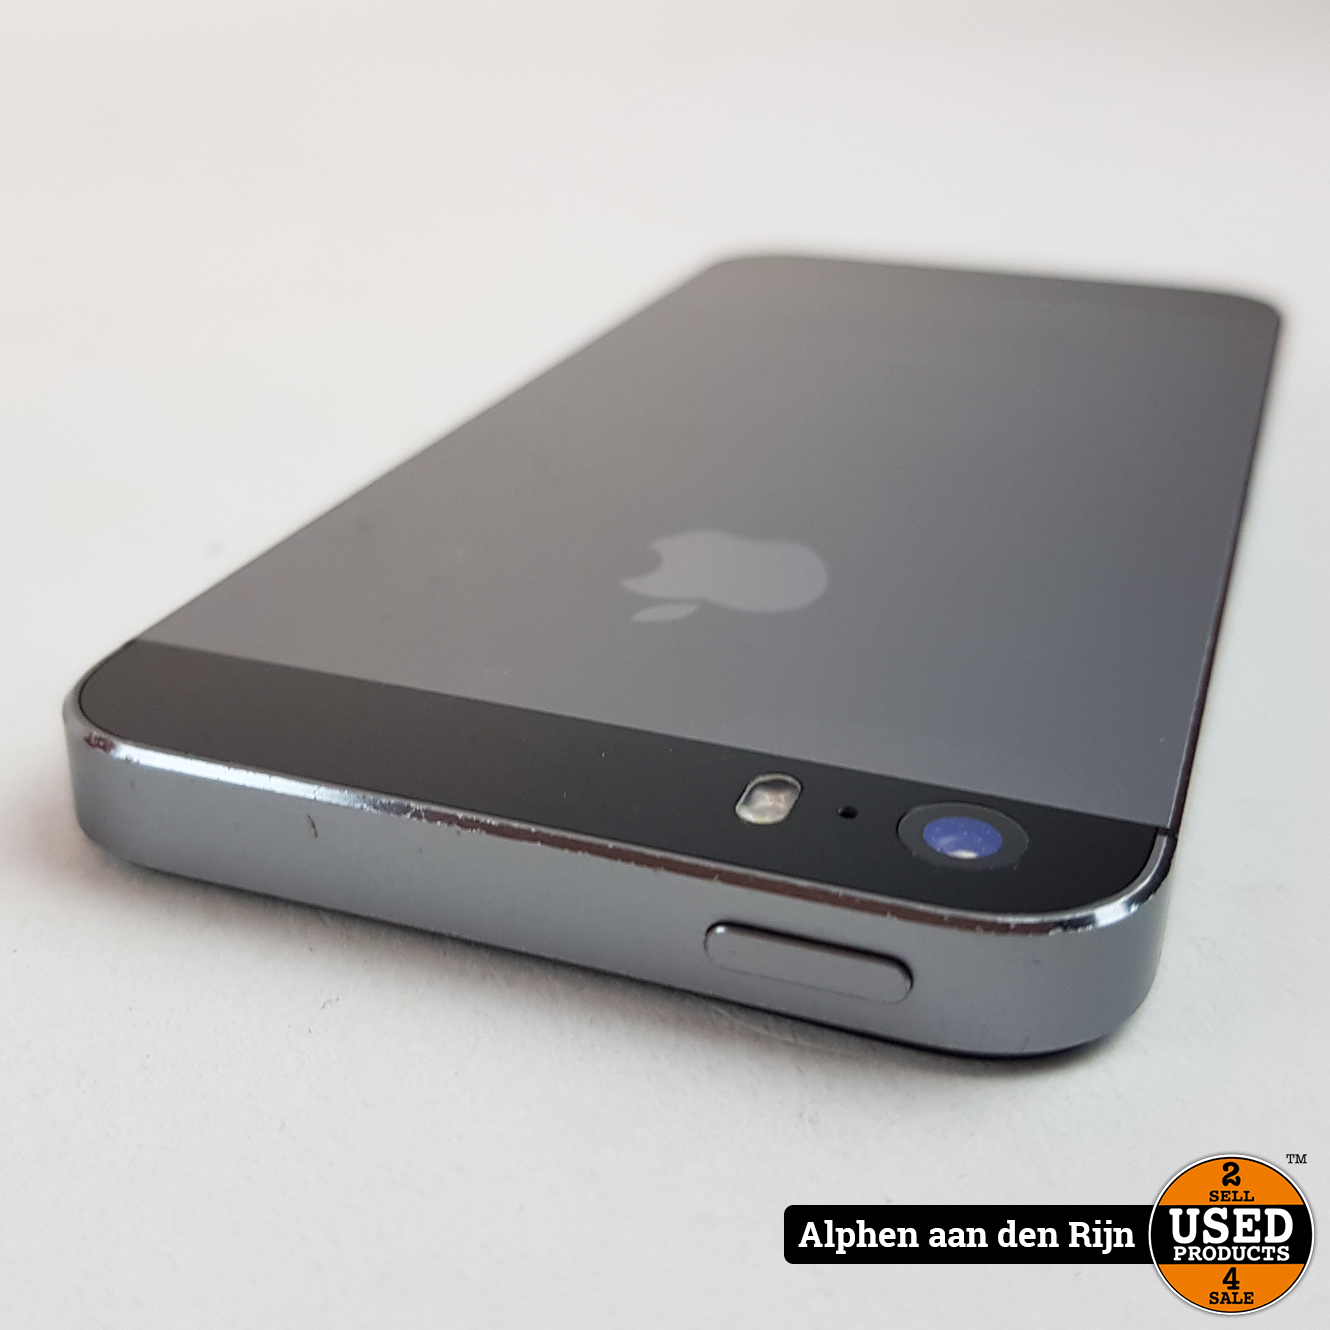 iPhone 5s 16gb Space gray Used Products Alphen den Rijn